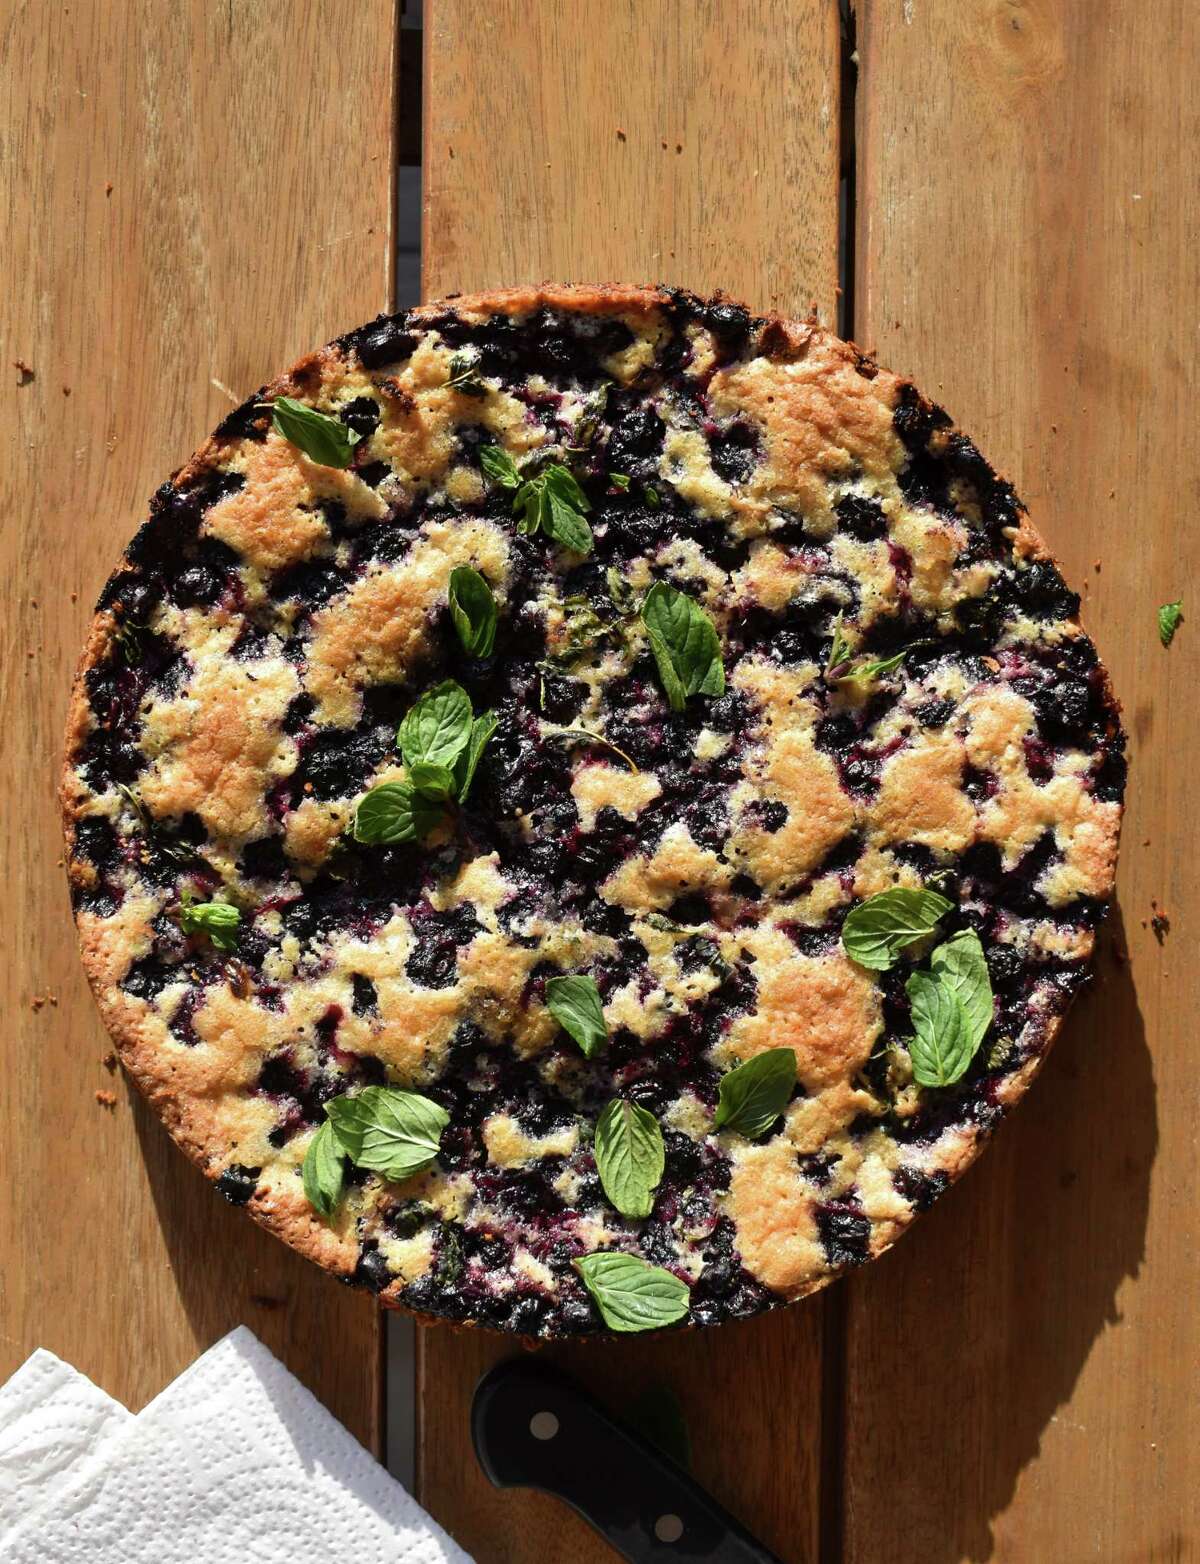 This blueberry and mint cake is easy to make while traveling this summer.